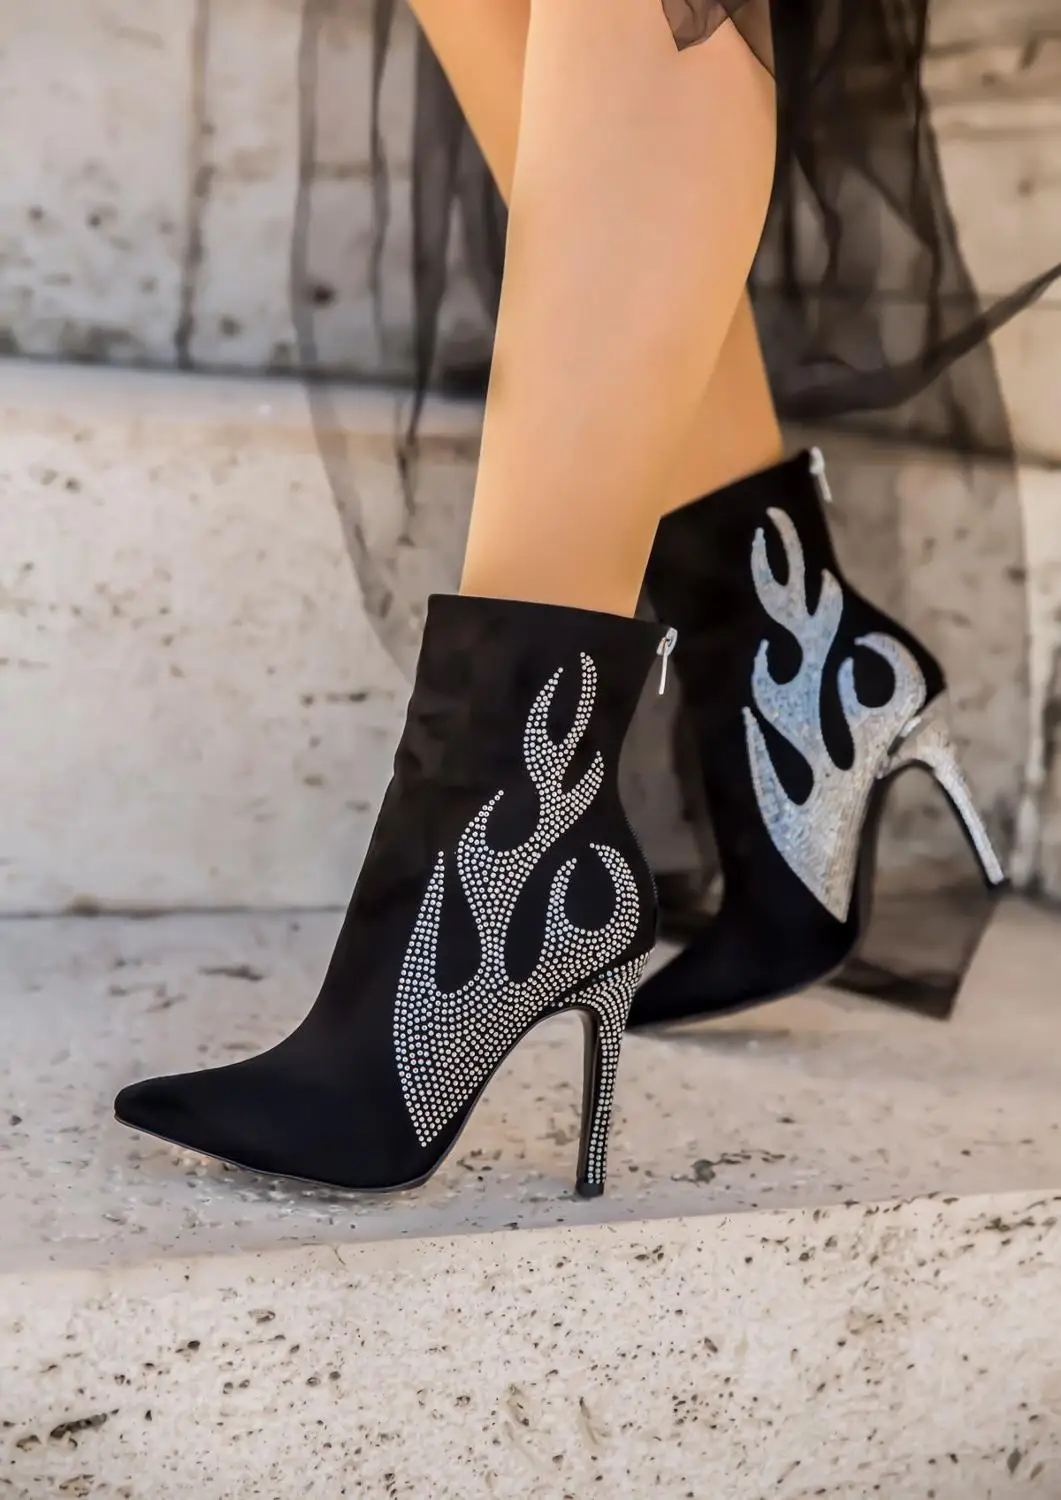 

Black Color PU Suede Leather New Season 2021 Winter Autmn Fashion Ankle High Heel Different Stylish Female Women Shoes Boots